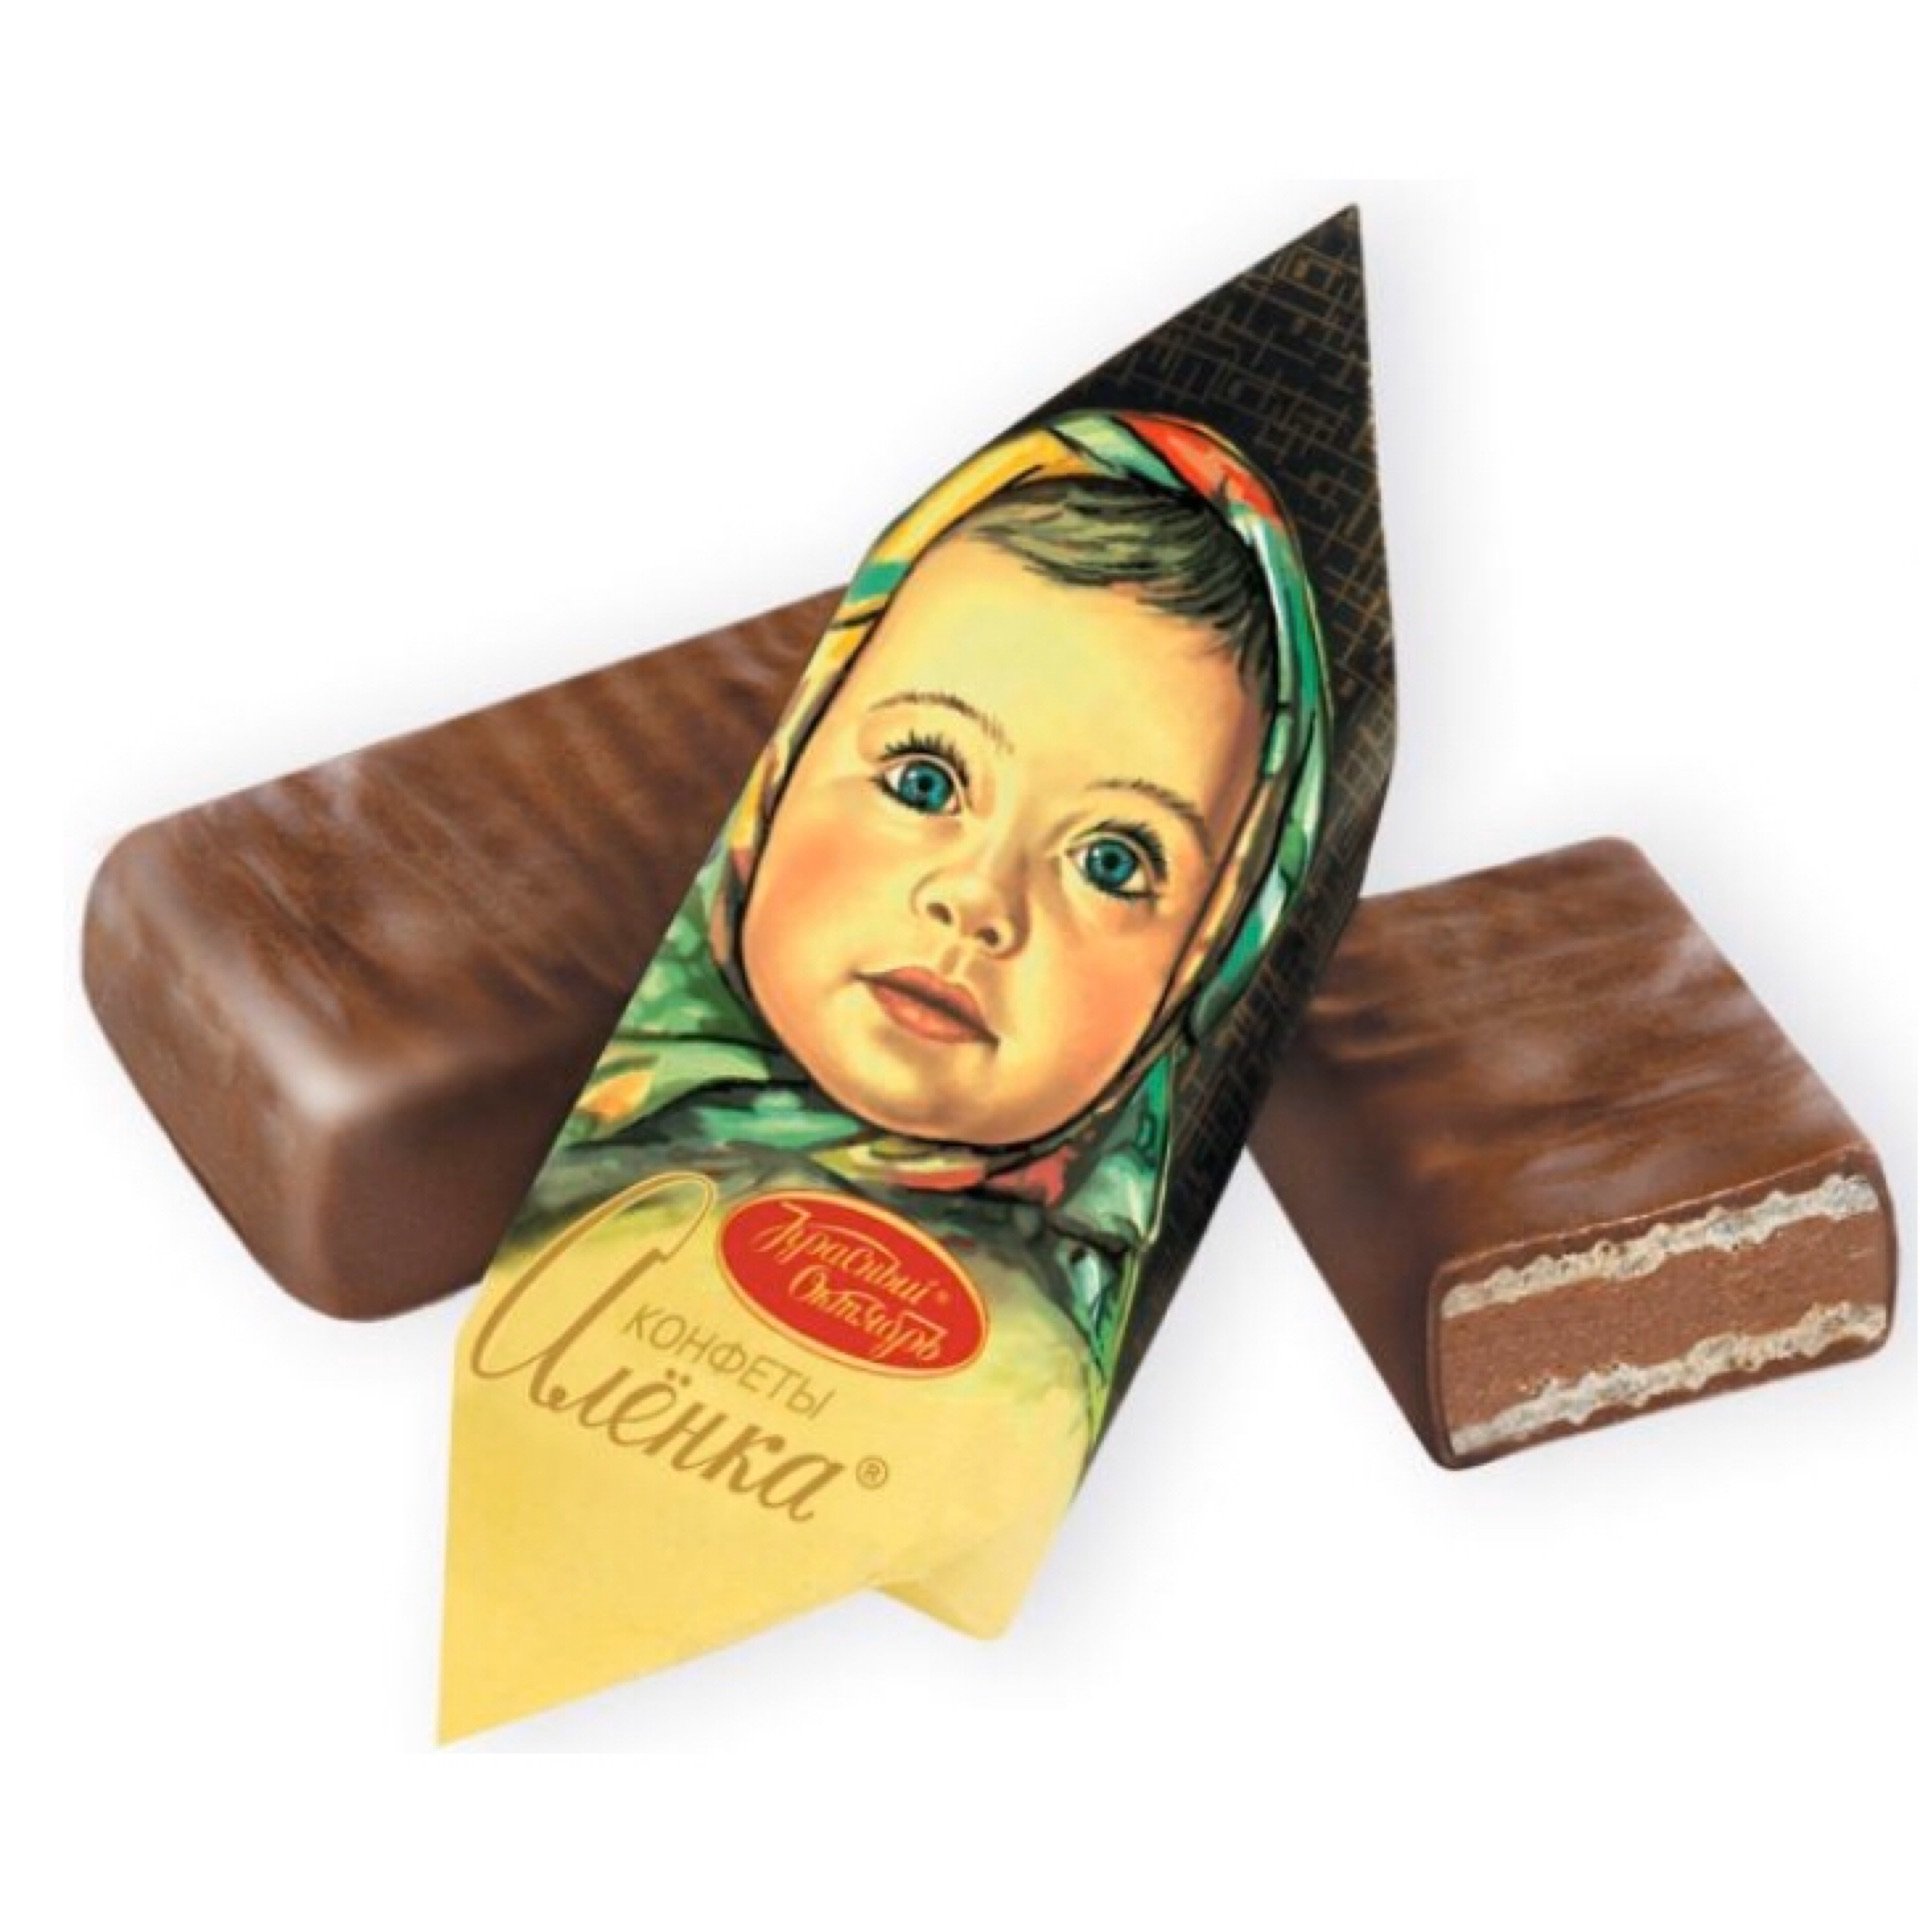 Chocolate Candy, Alenka, Red October, 2.2 lbs/ 1 kg